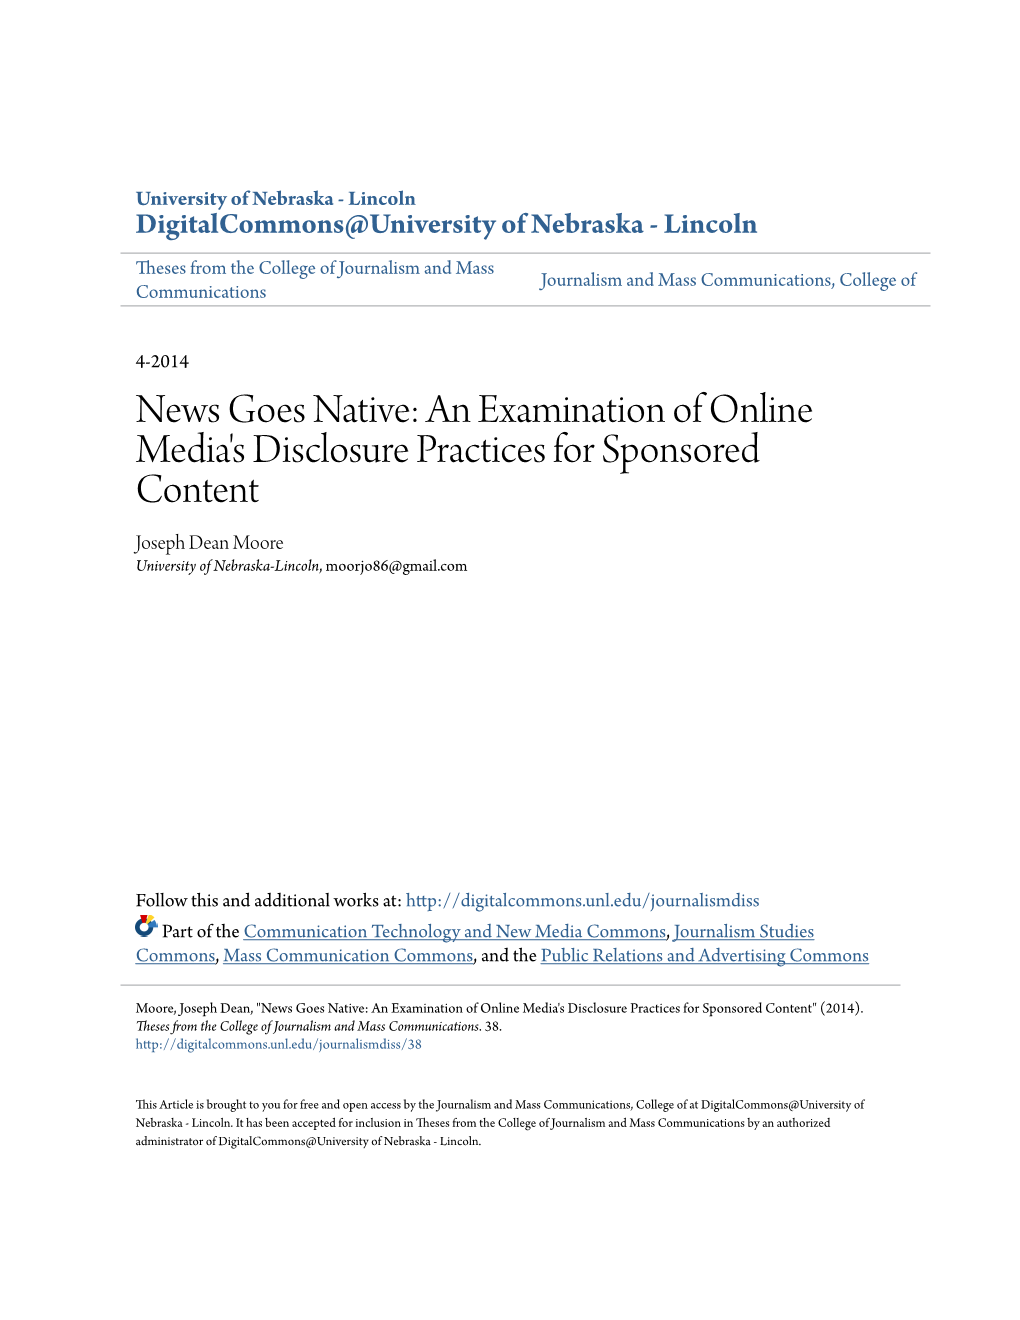 News Goes Native: an Examination of Online Media's Disclosure Practices for Sponsored Content Joseph Dean Moore University of Nebraska-Lincoln, Moorjo86@Gmail.Com